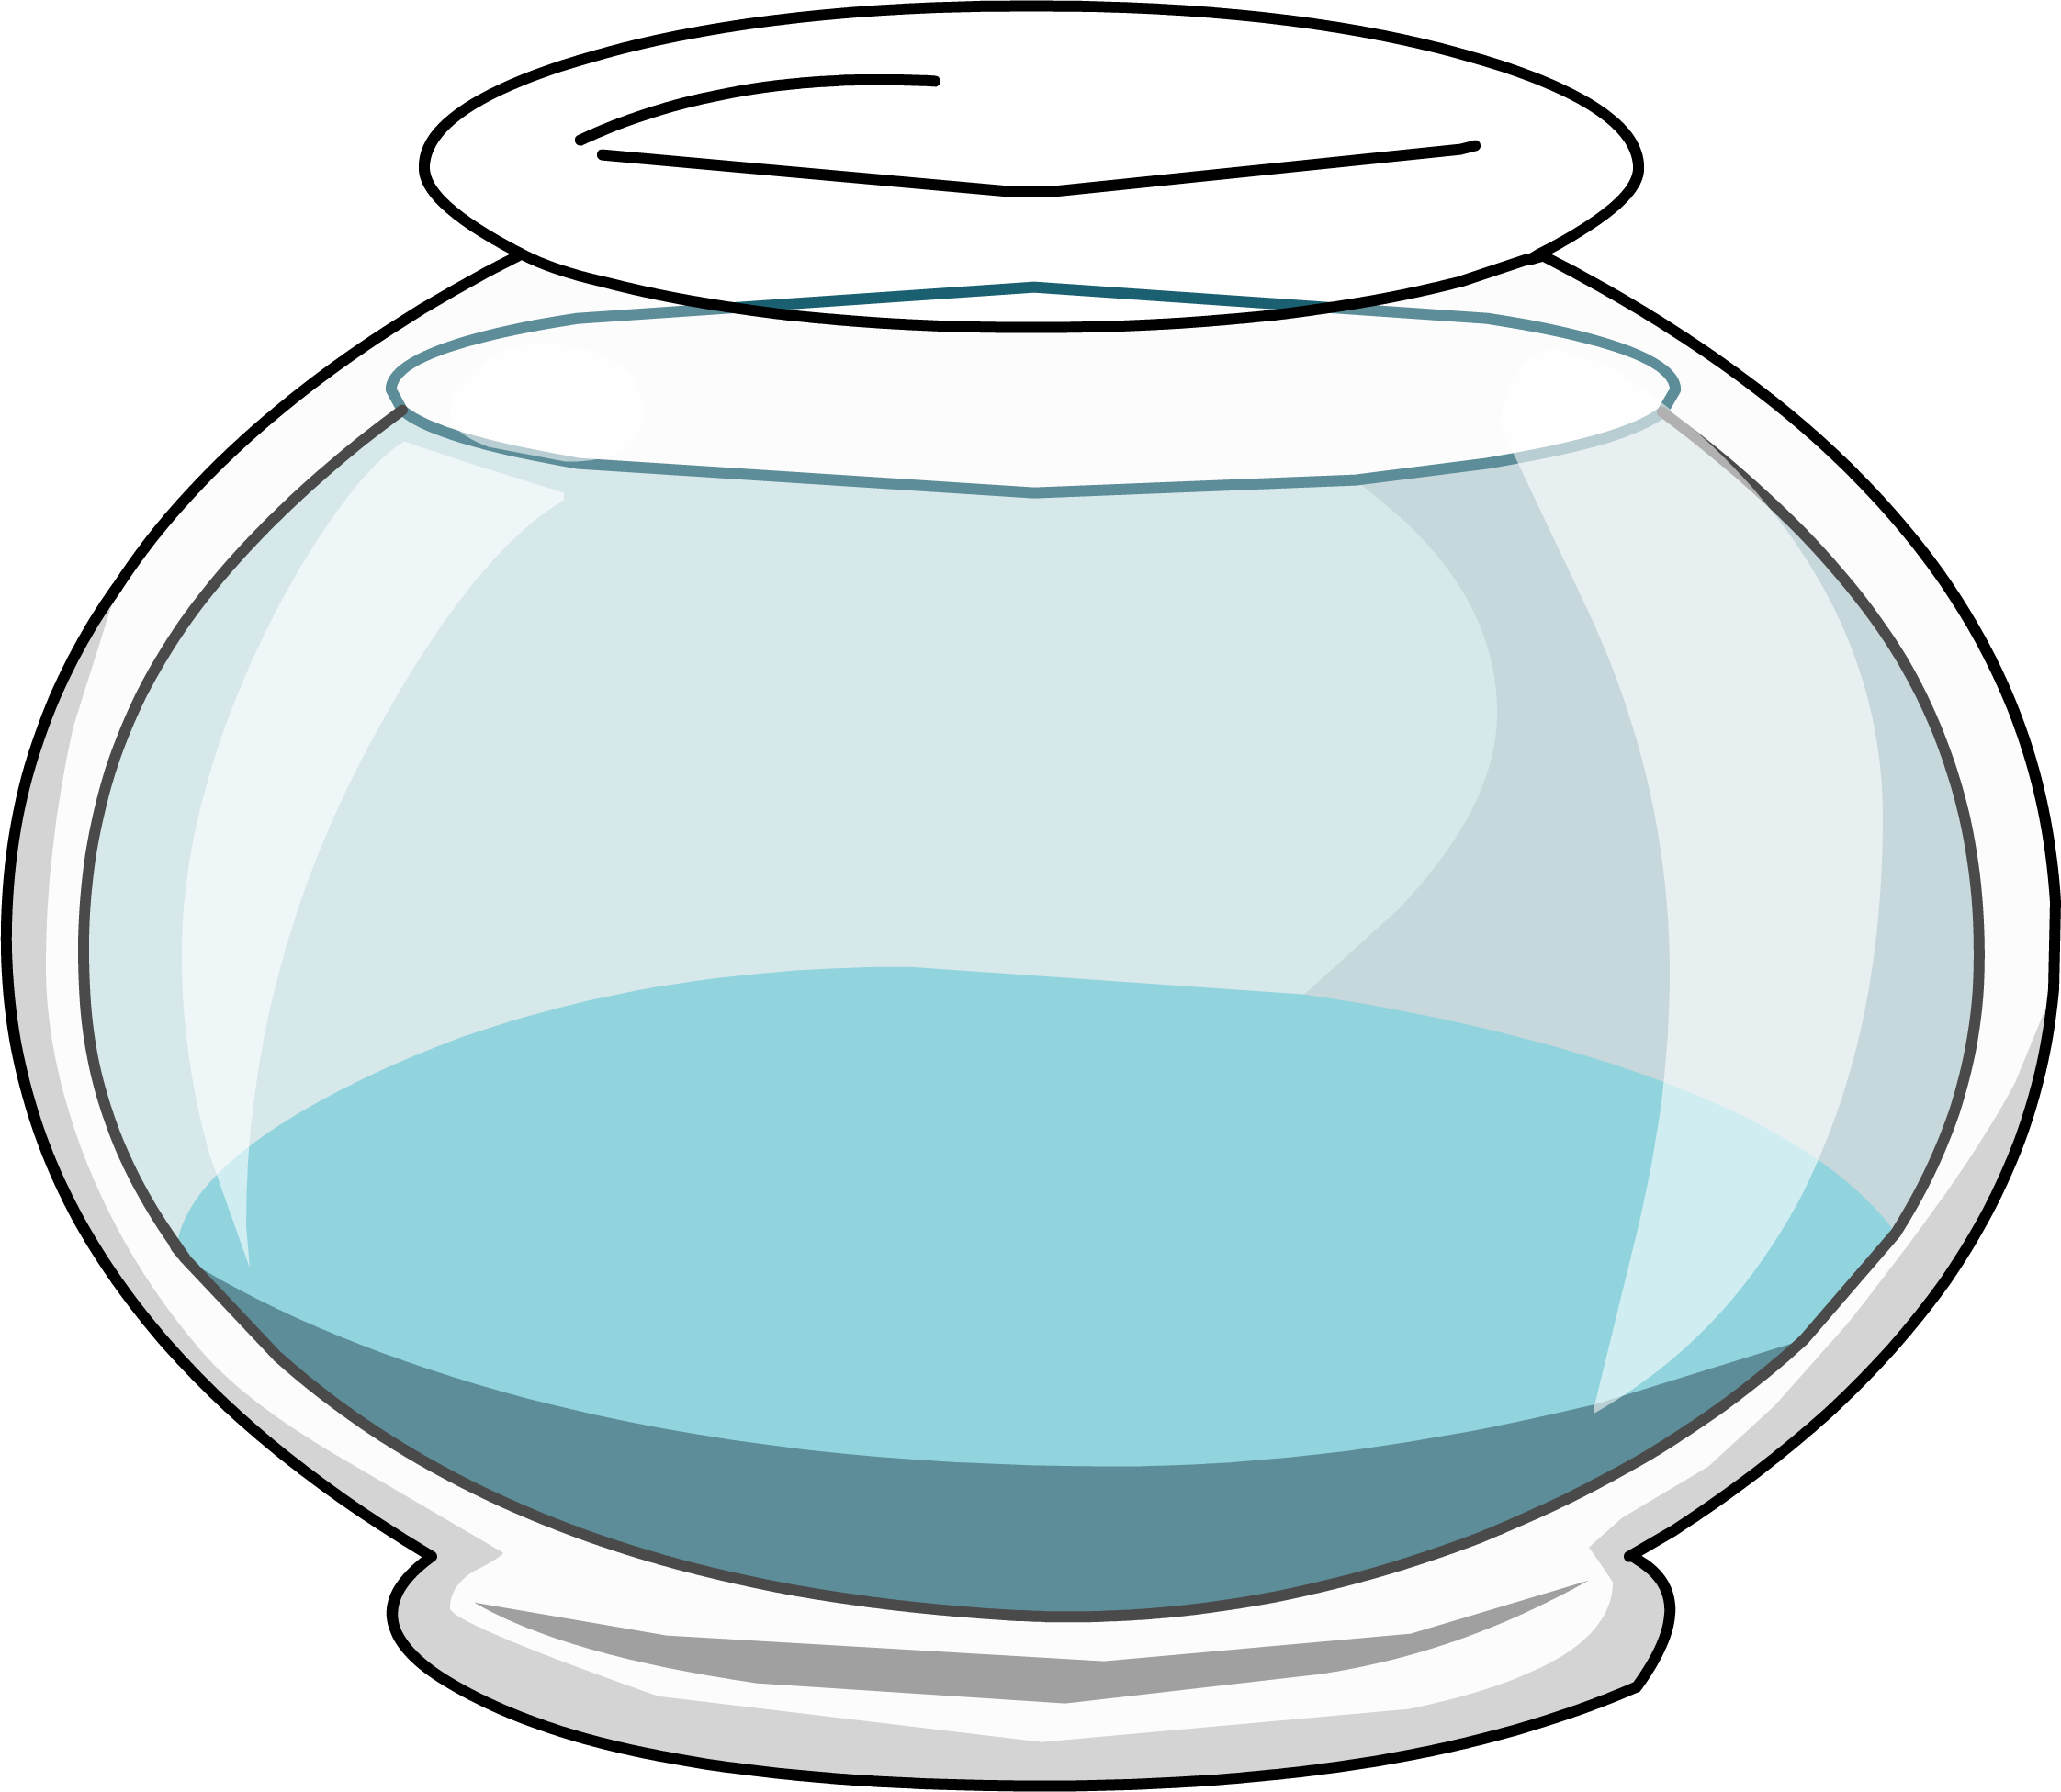 free-fishbowl-png-download-free-fishbowl-png-png-images-free-cliparts